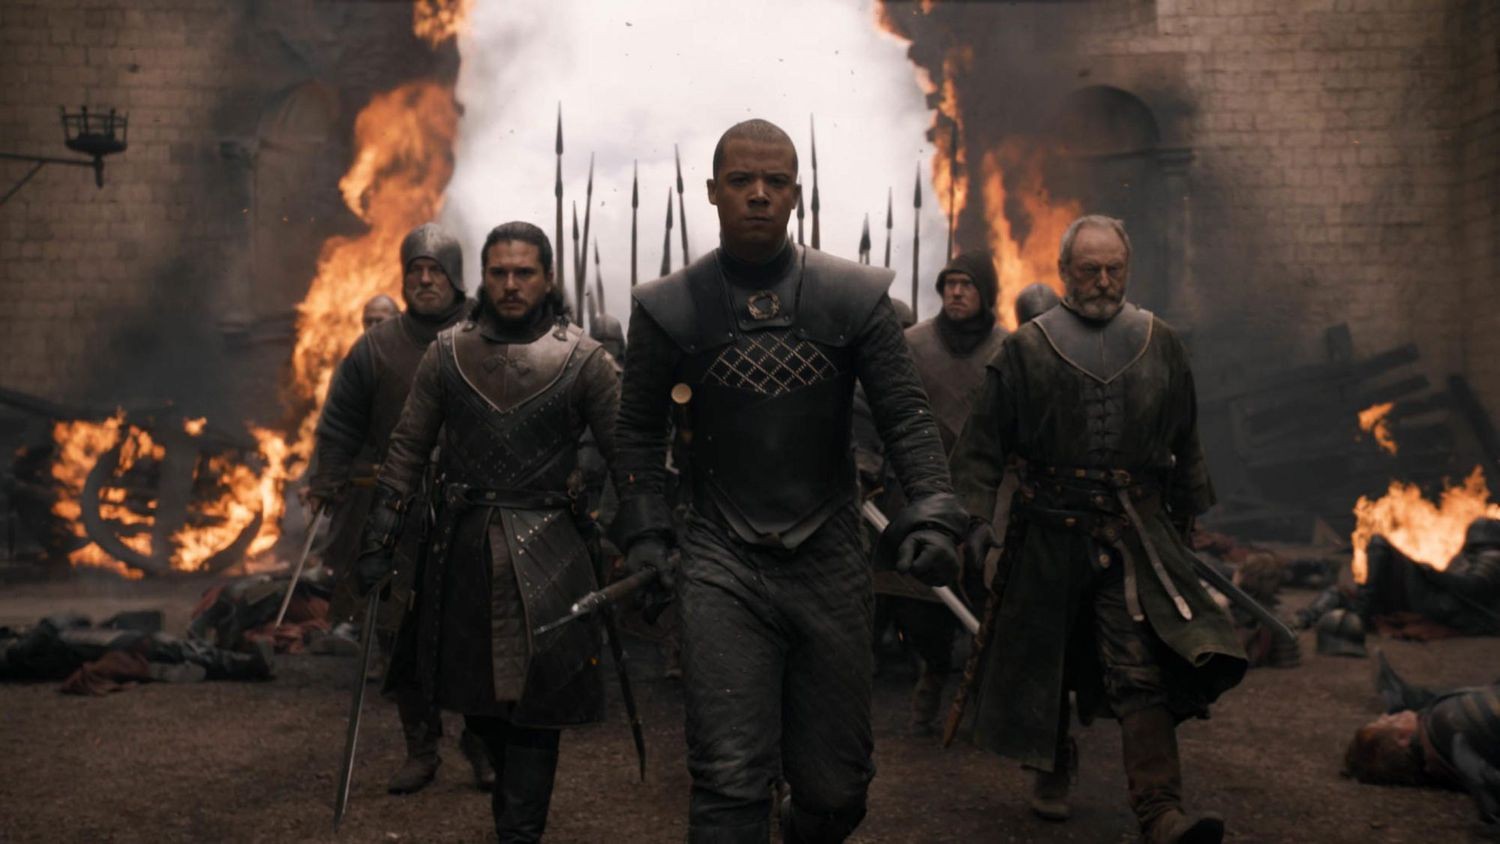 Game fo Thrones Season 8 received extreme backlash from fans